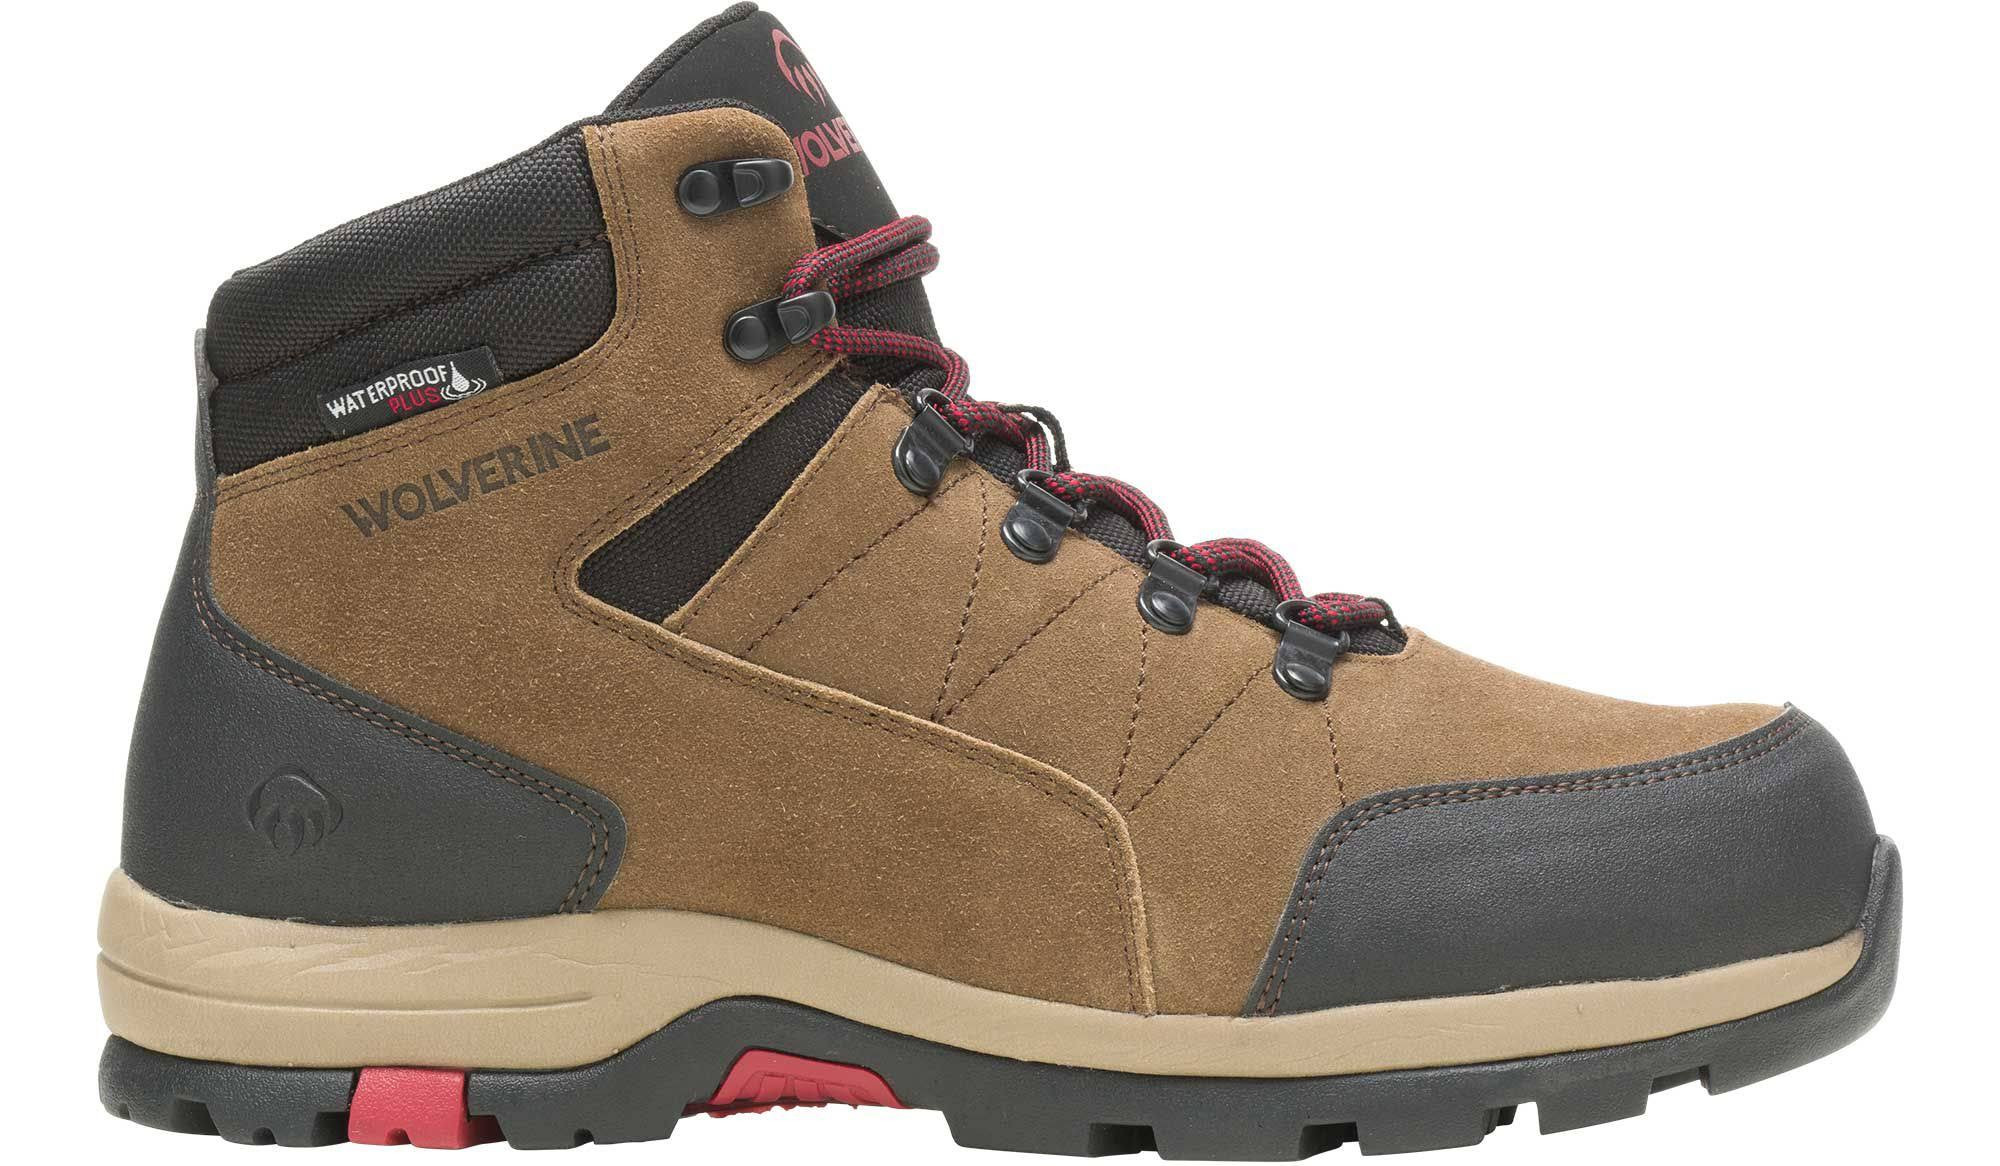 Wolverine Men&s Rapid Hiking Boots - Sand - Thefalconwears